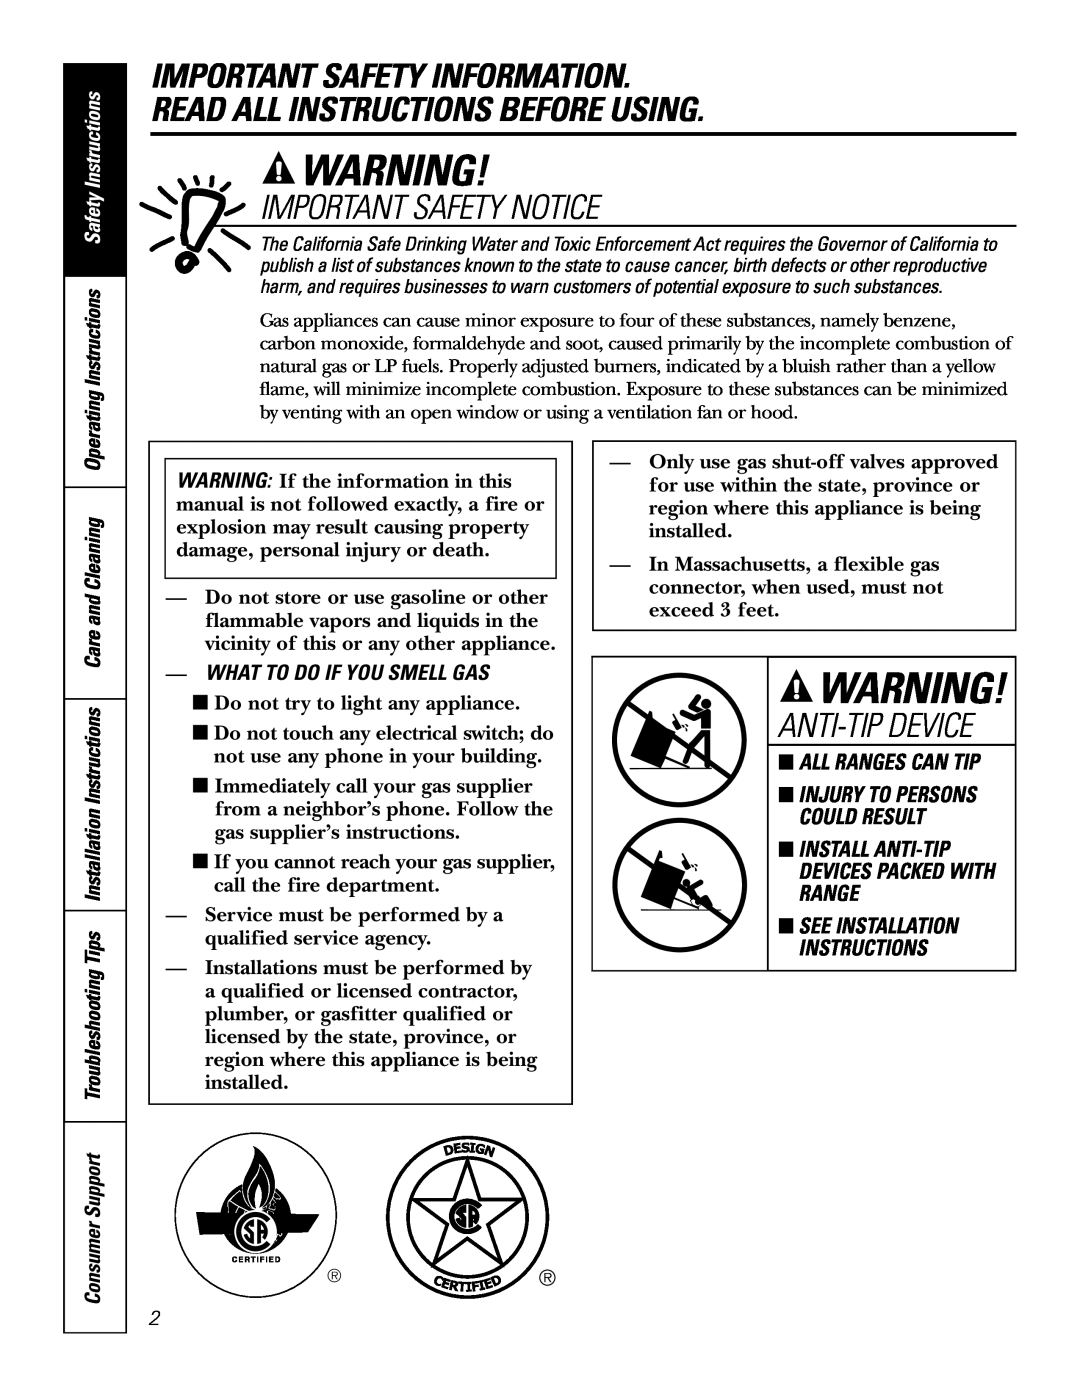 GE RGA620 Important Safety Information Read All Instructions Before Using, Important Safety Notice, Anti-Tip Device 